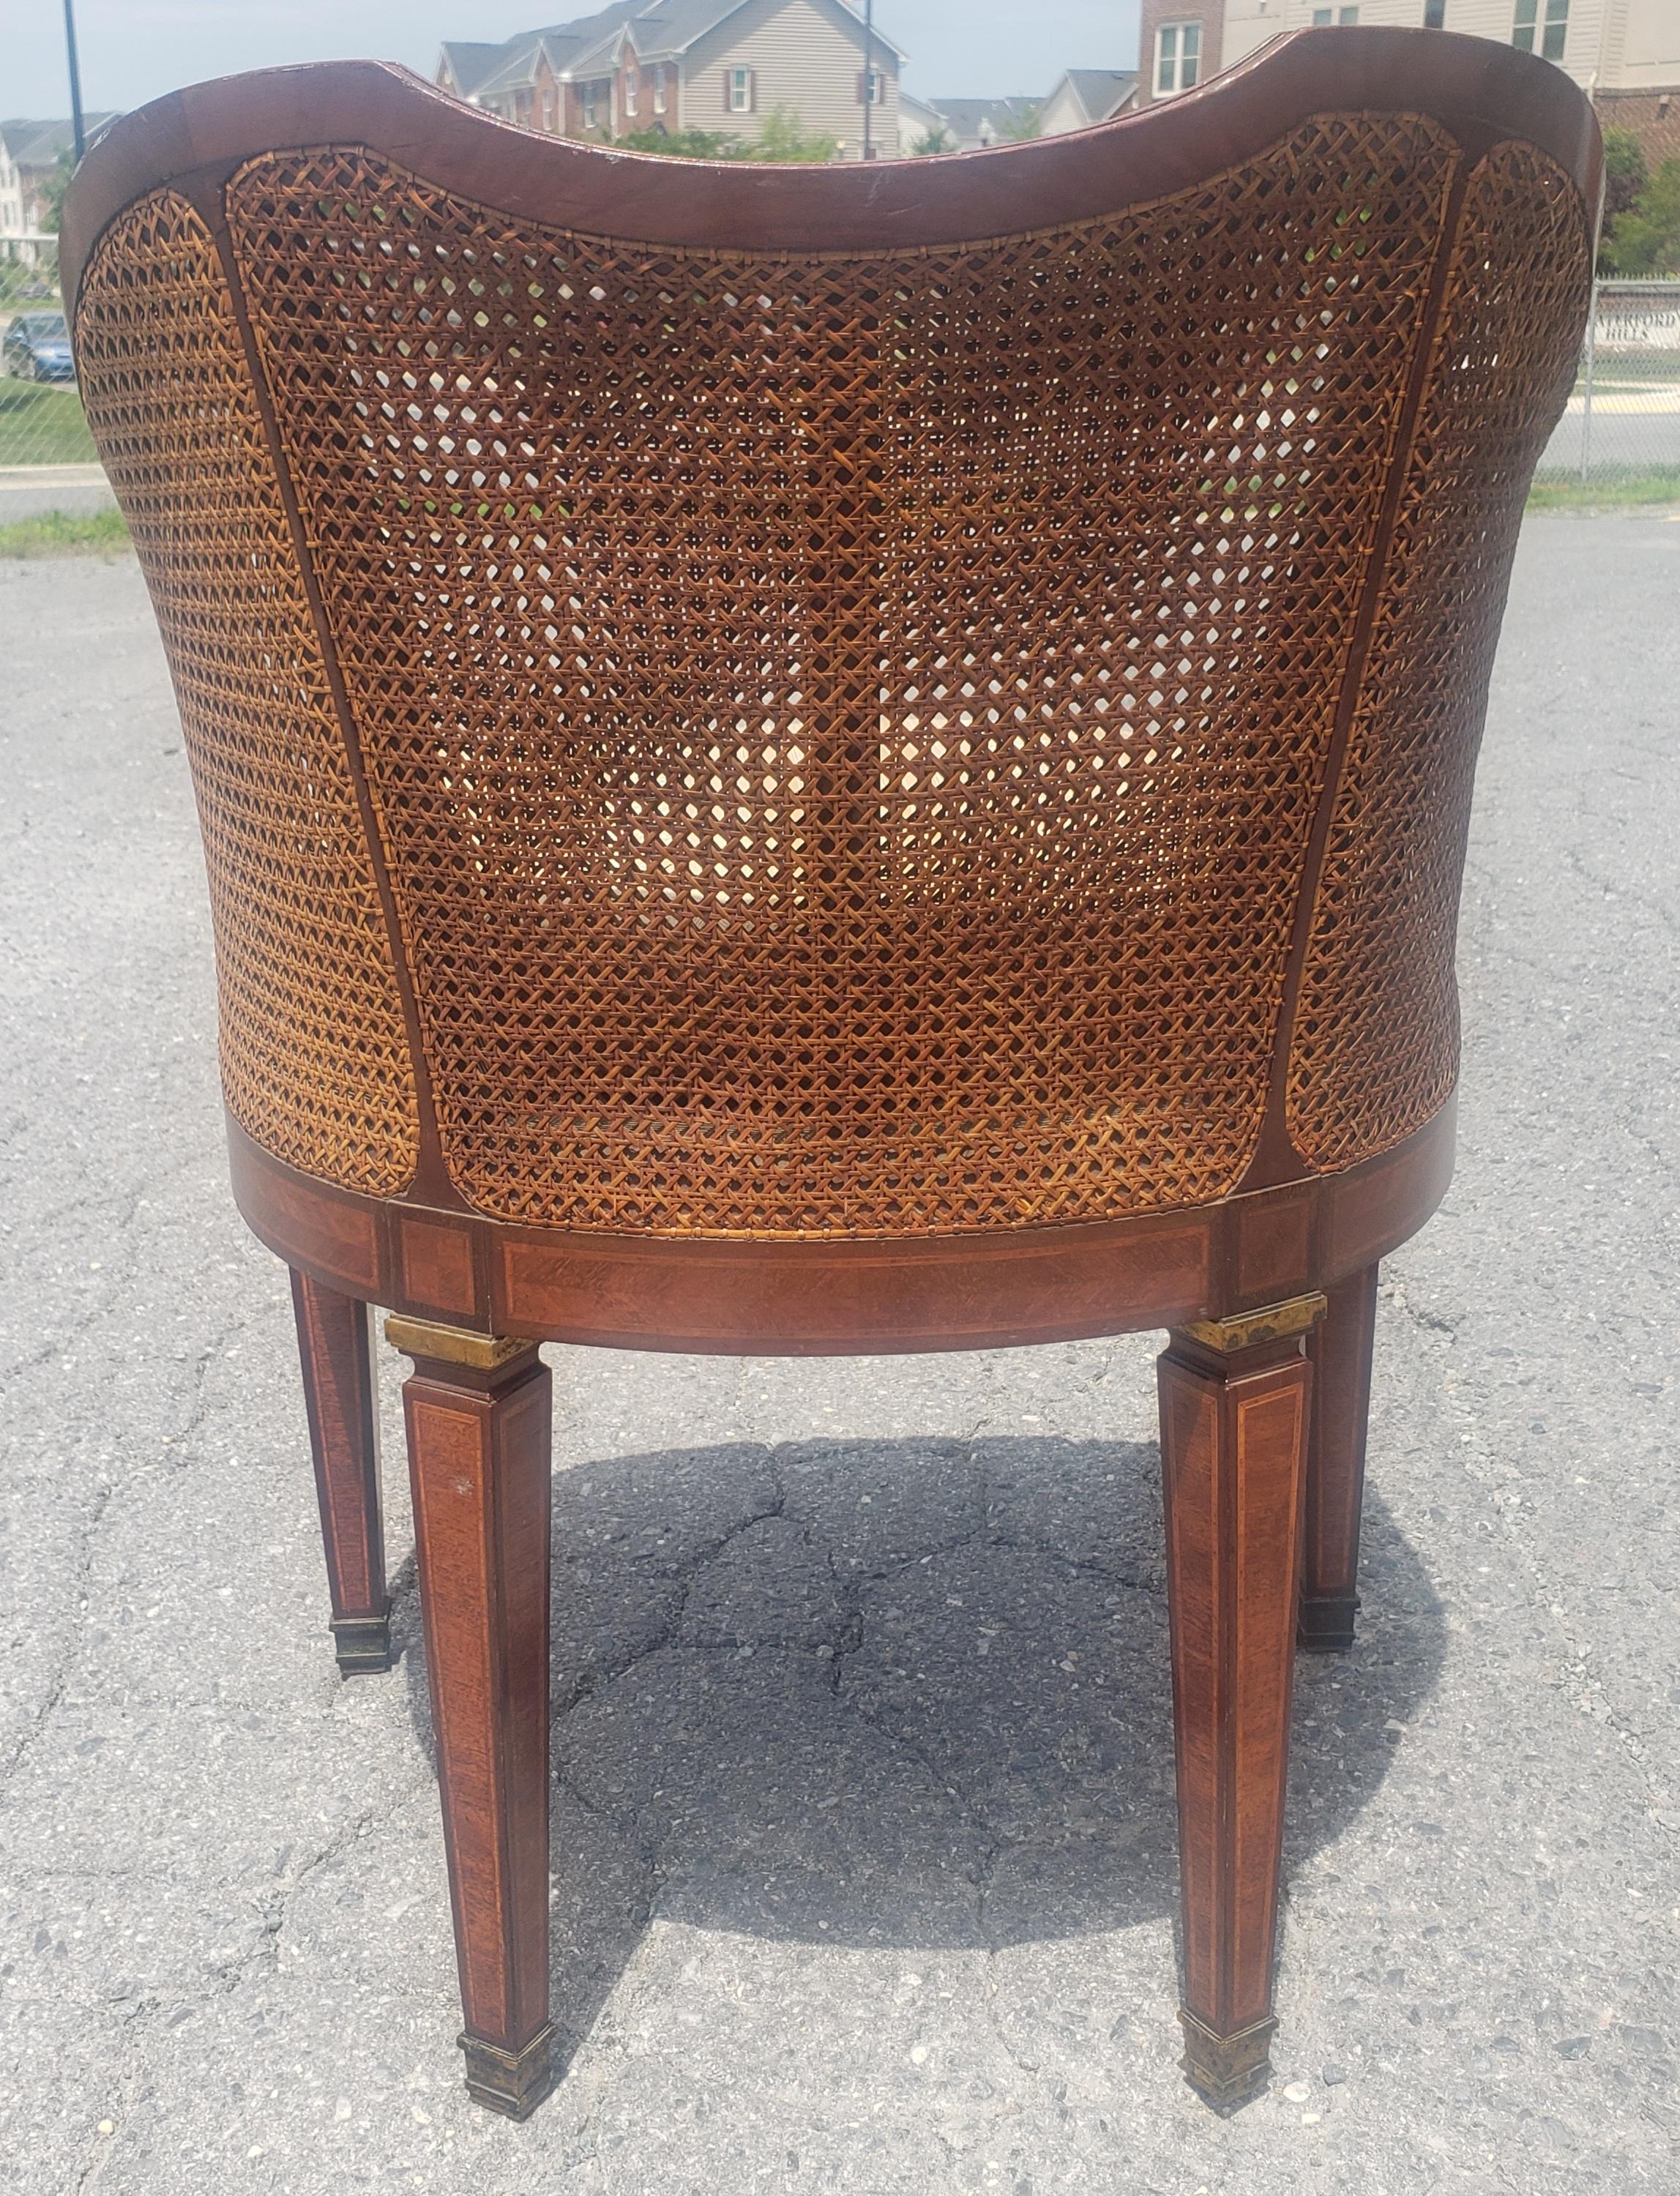 19th Century Louis XV Transitional Mahogany and Kingwood Marquetry Burl and Cane Barrel Chair